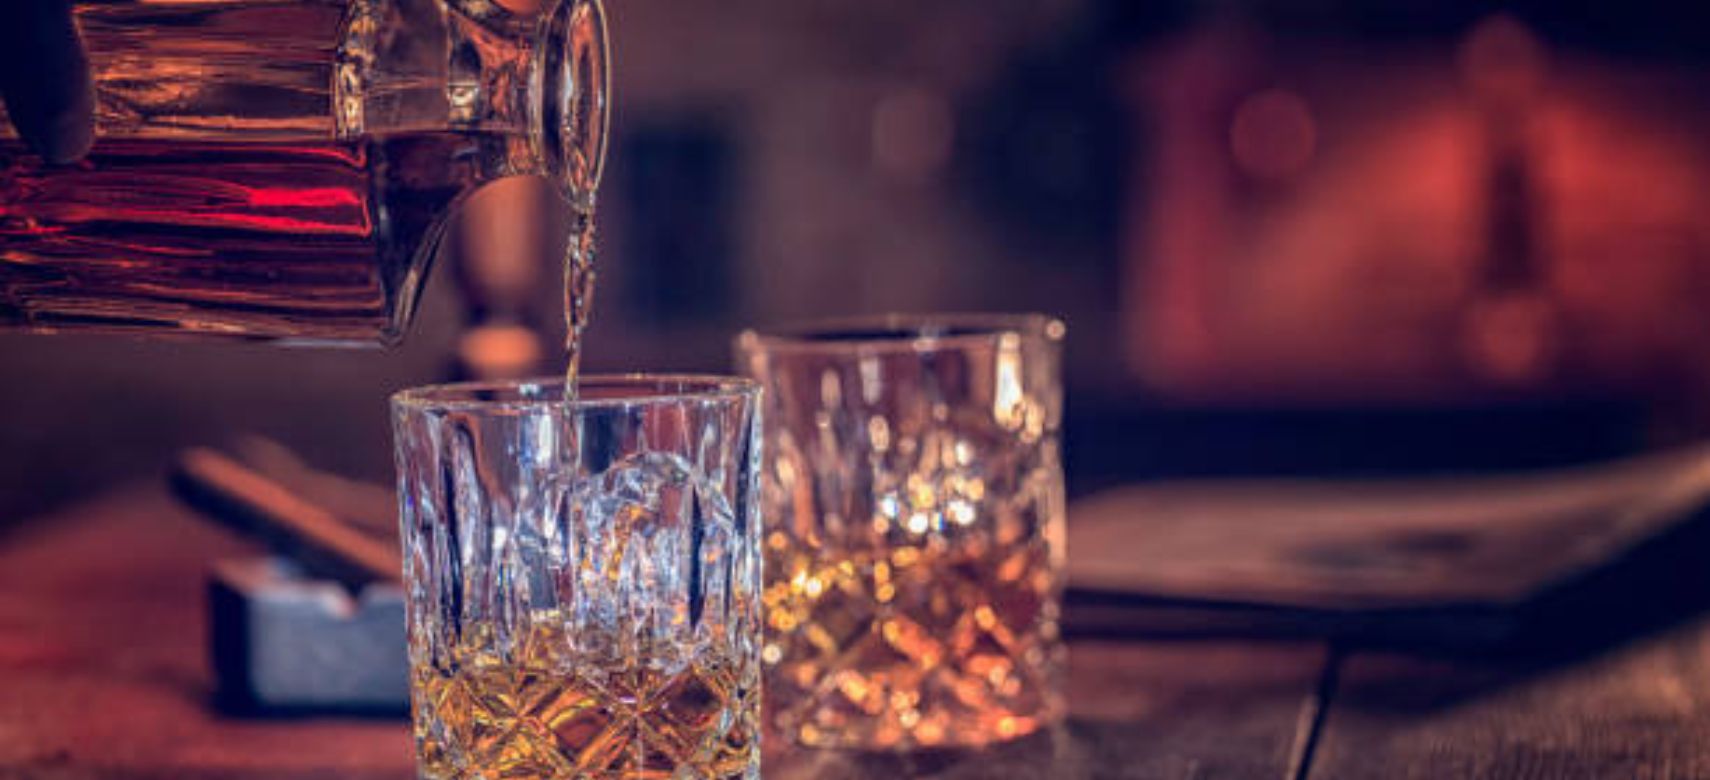 Photo for: Giving NYC's craft whiskey scene the recognition it deserves